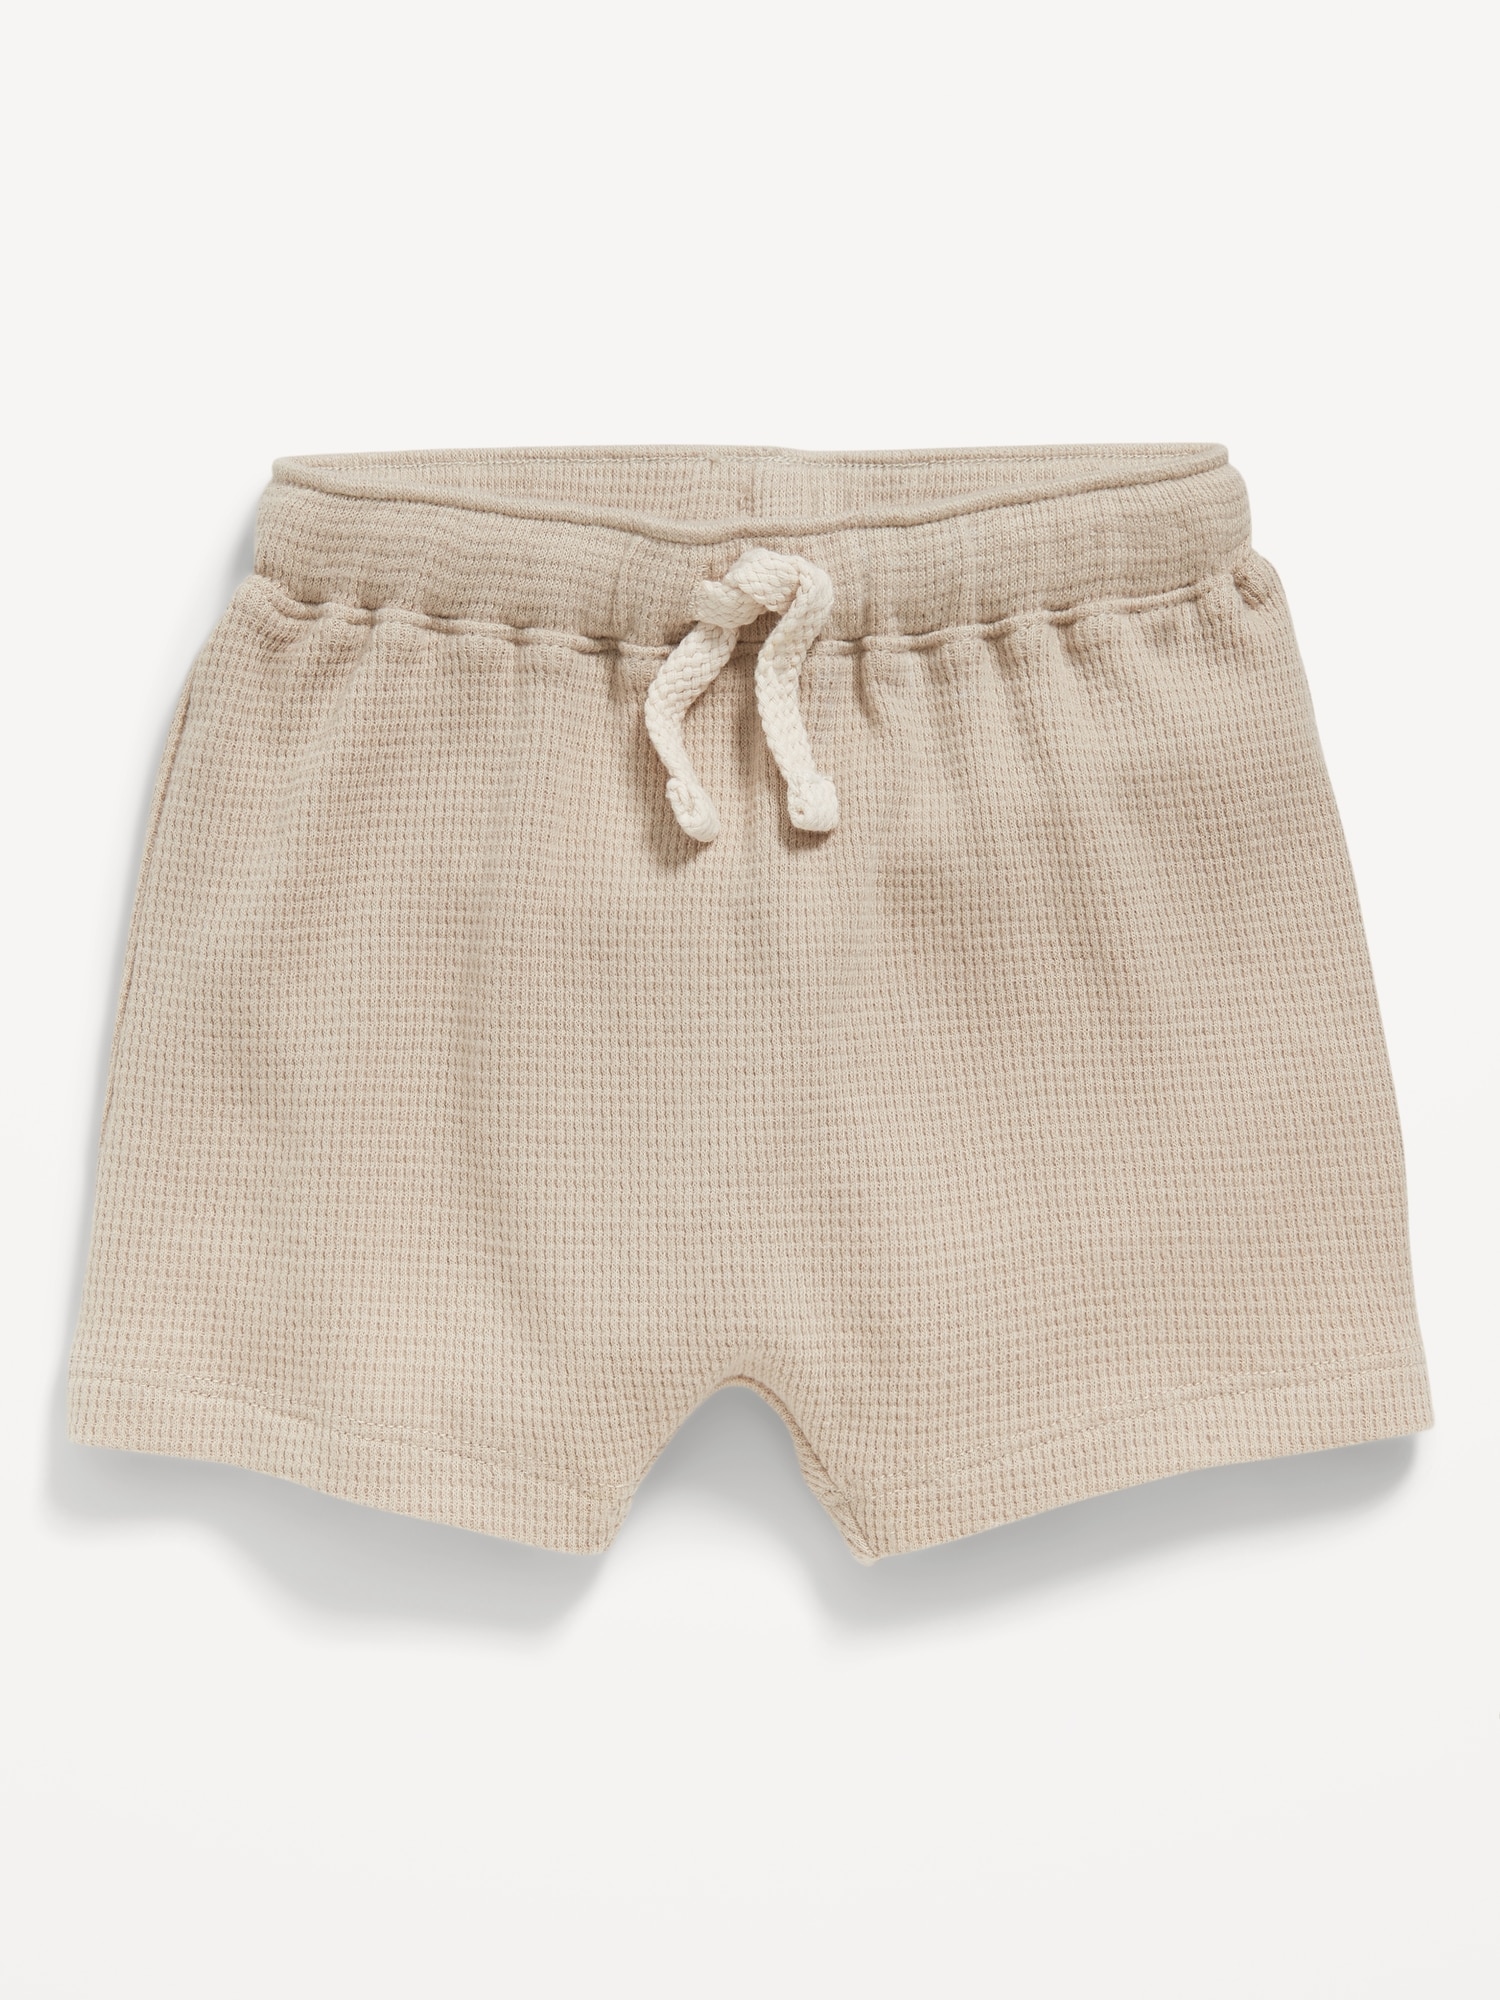 Thermal-Knit Pull-On Shorts for Baby Hot Deal